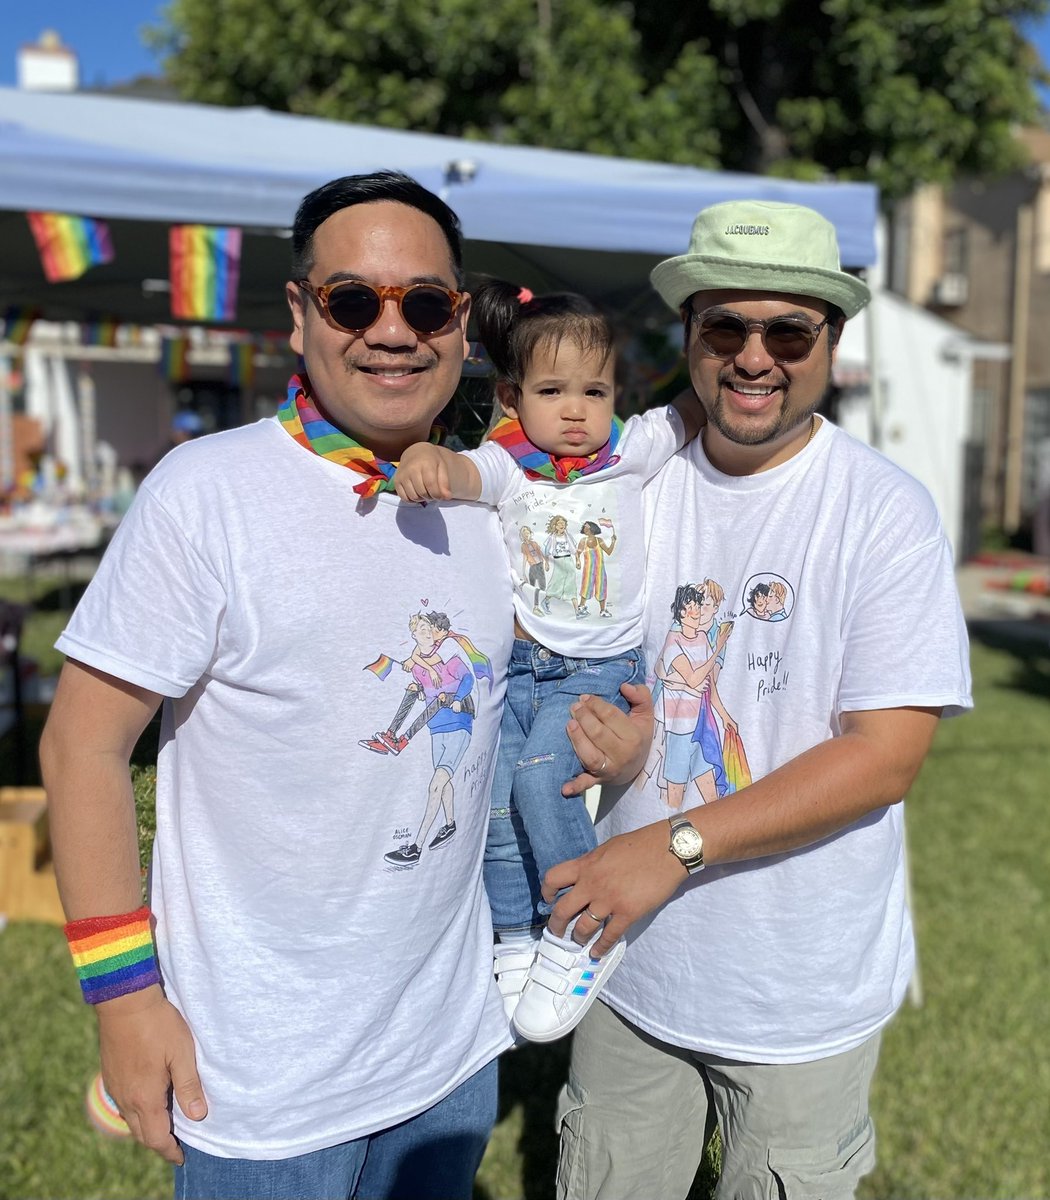 On LA #PrideWeekend our family is celebrating with shirts featuring characters from #Heartstopper the transformative work of @AliceOseman. 🏳️‍🌈🏳️‍⚧️